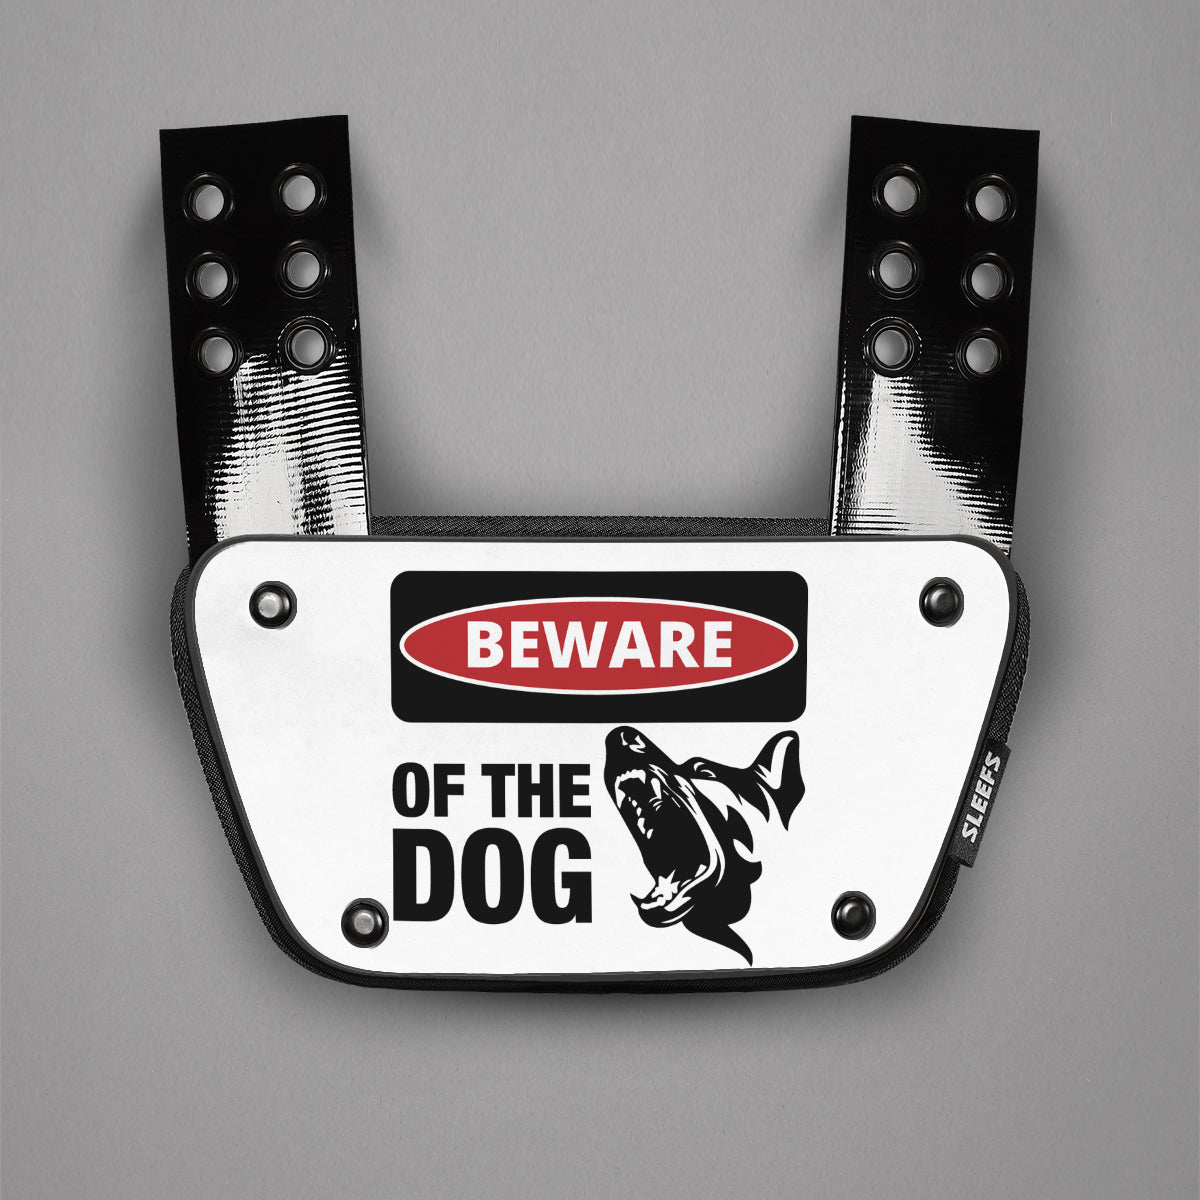 Beware of the Dog Sticker for Back Plate